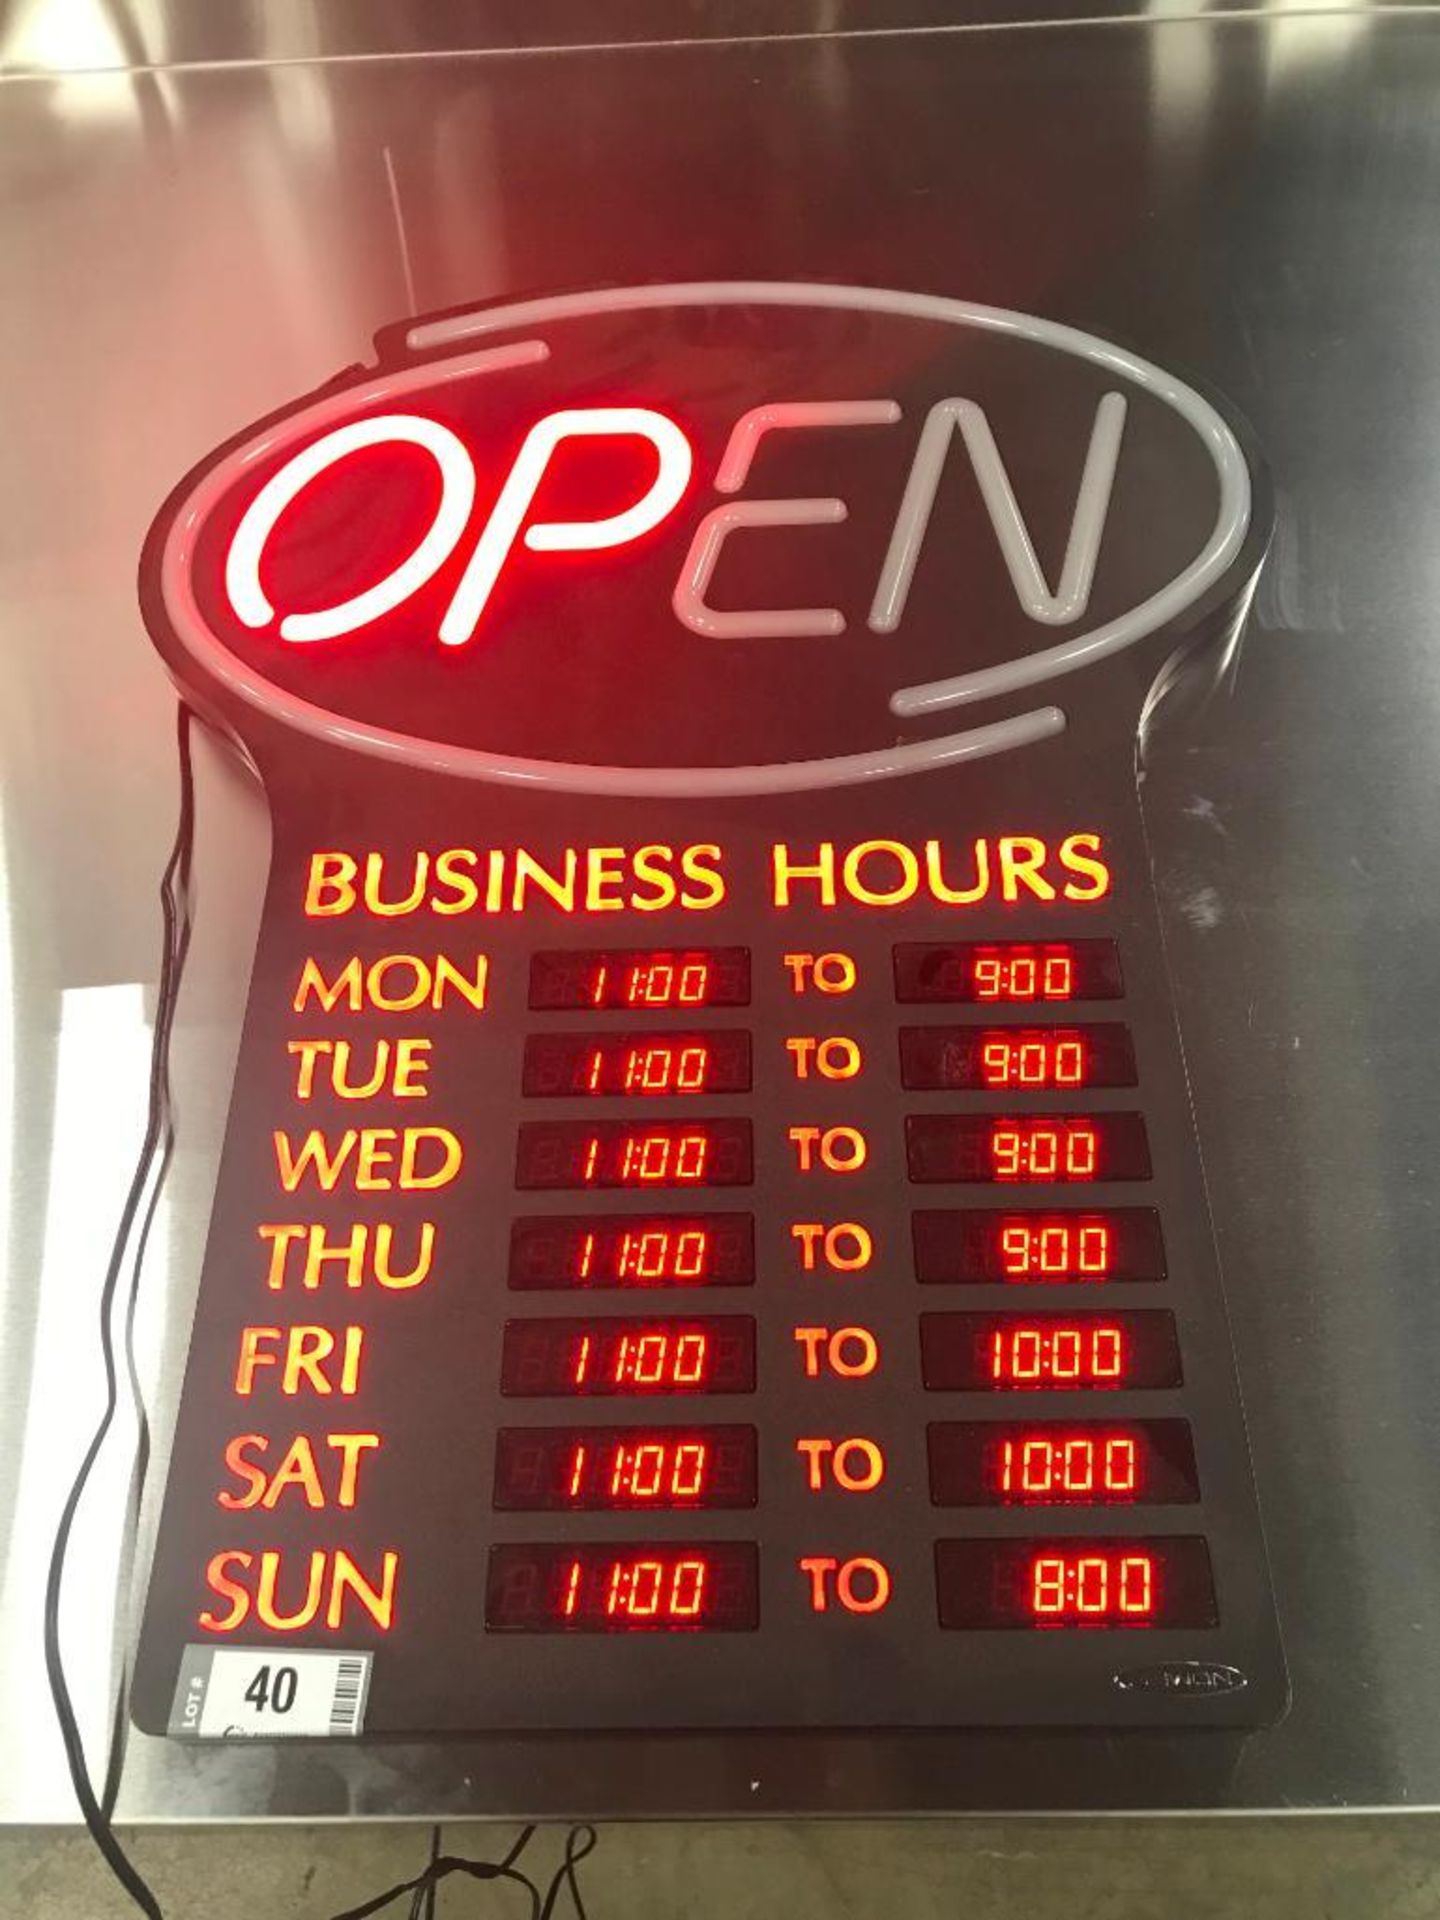 NEWON LED OPEN SIGN WITH PROGRAMMABLE BUSINESS HOURS AND FLASHING EFFECTS - Image 2 of 8